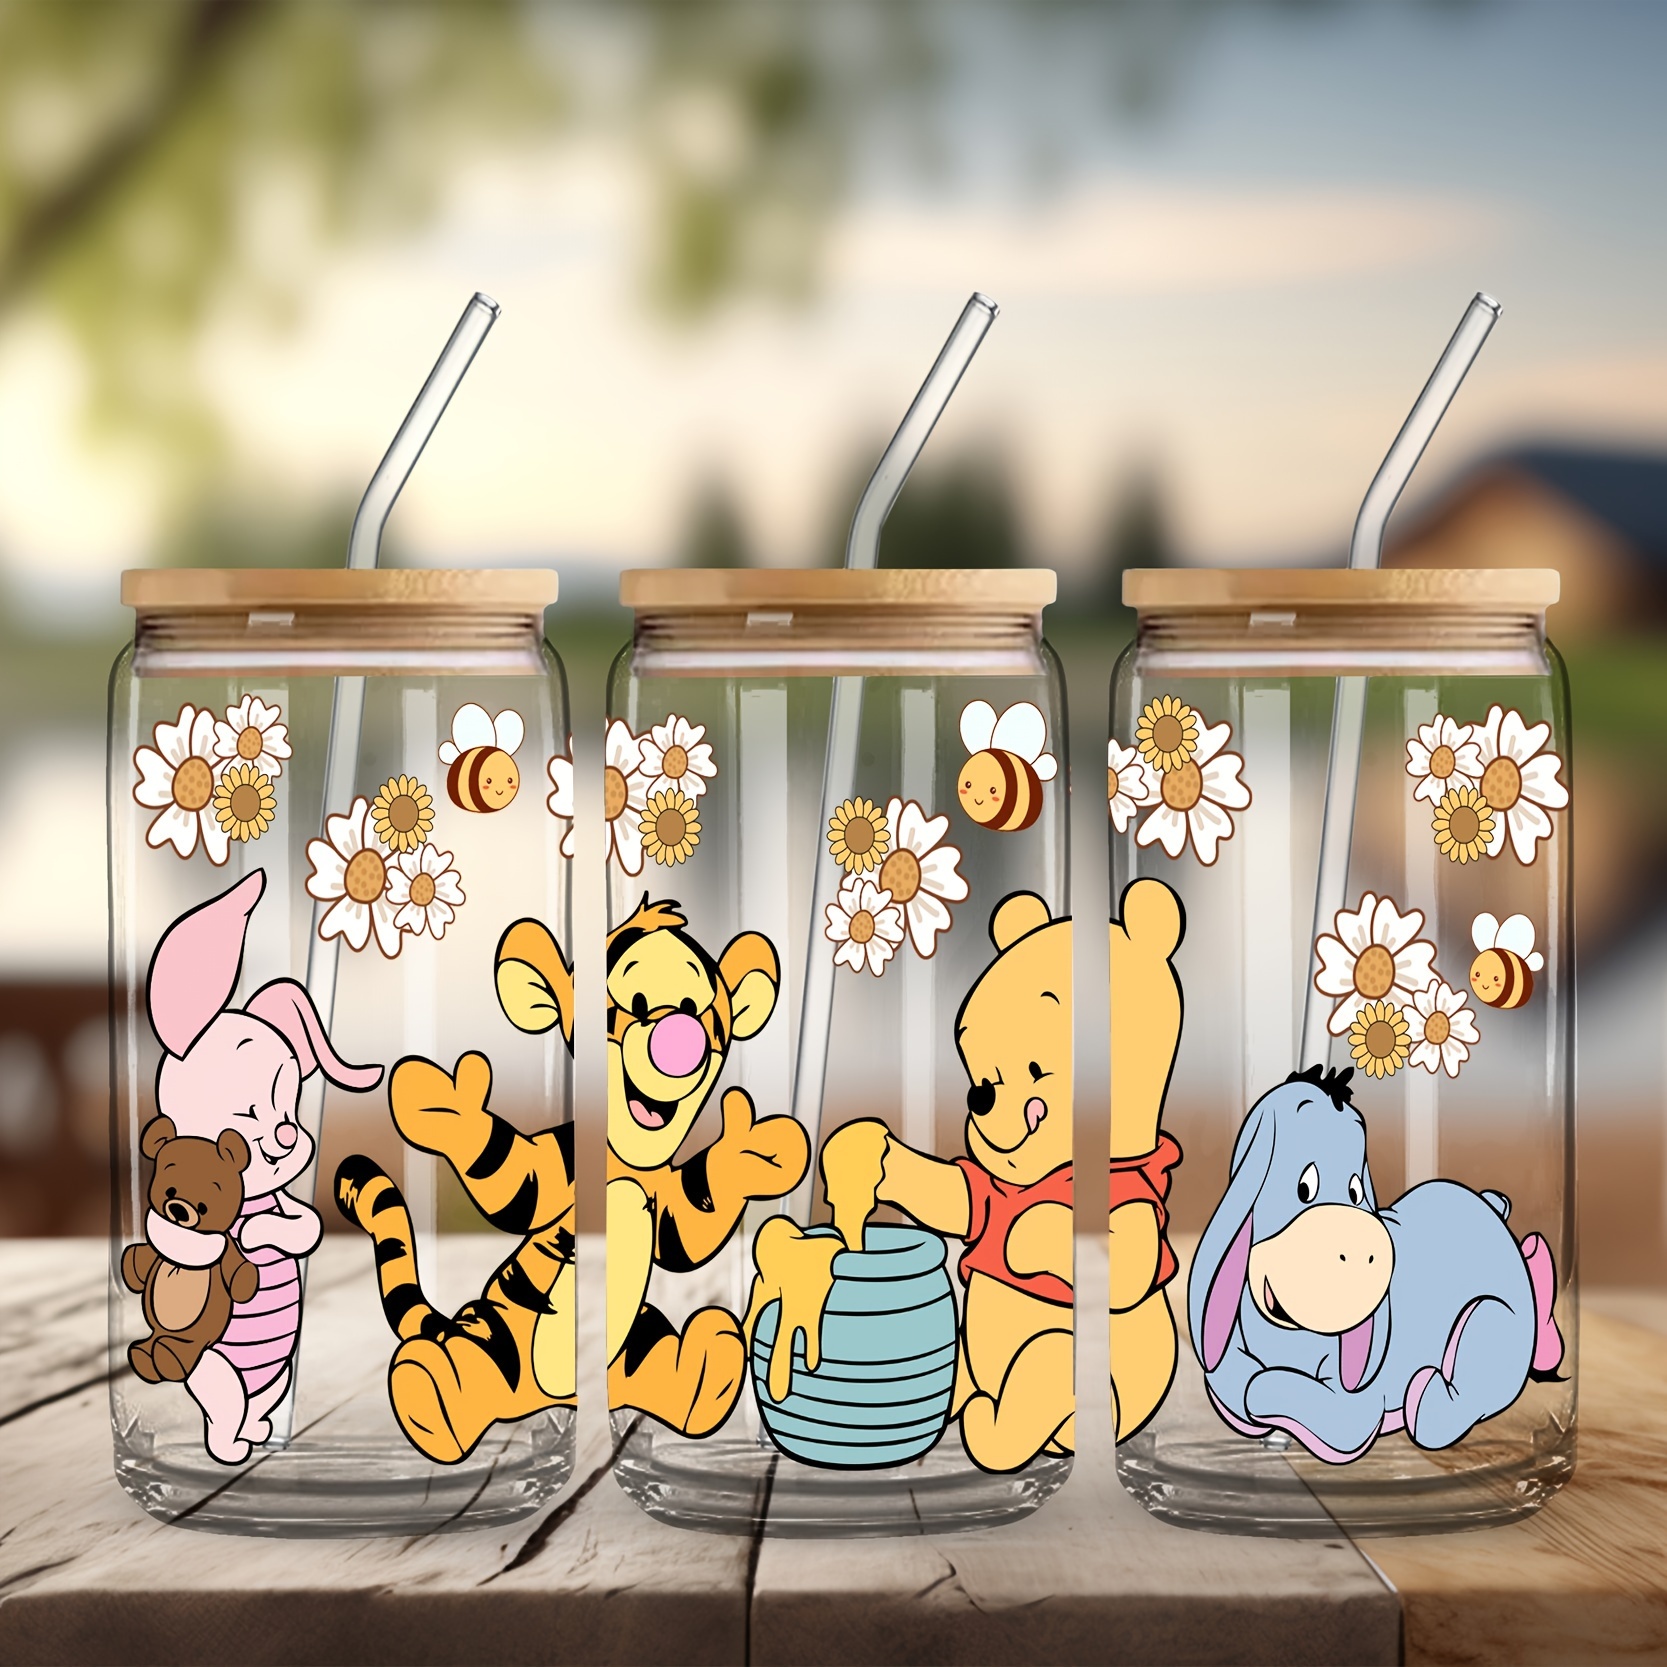 

Ume 16oz Disney And Tigger Printed Clear Glass Tumbler With Straw, Insulated Multipurpose Drinkware For Coffee, , Milk, Juice - Hand Wash Only, Reusable Glass Cup